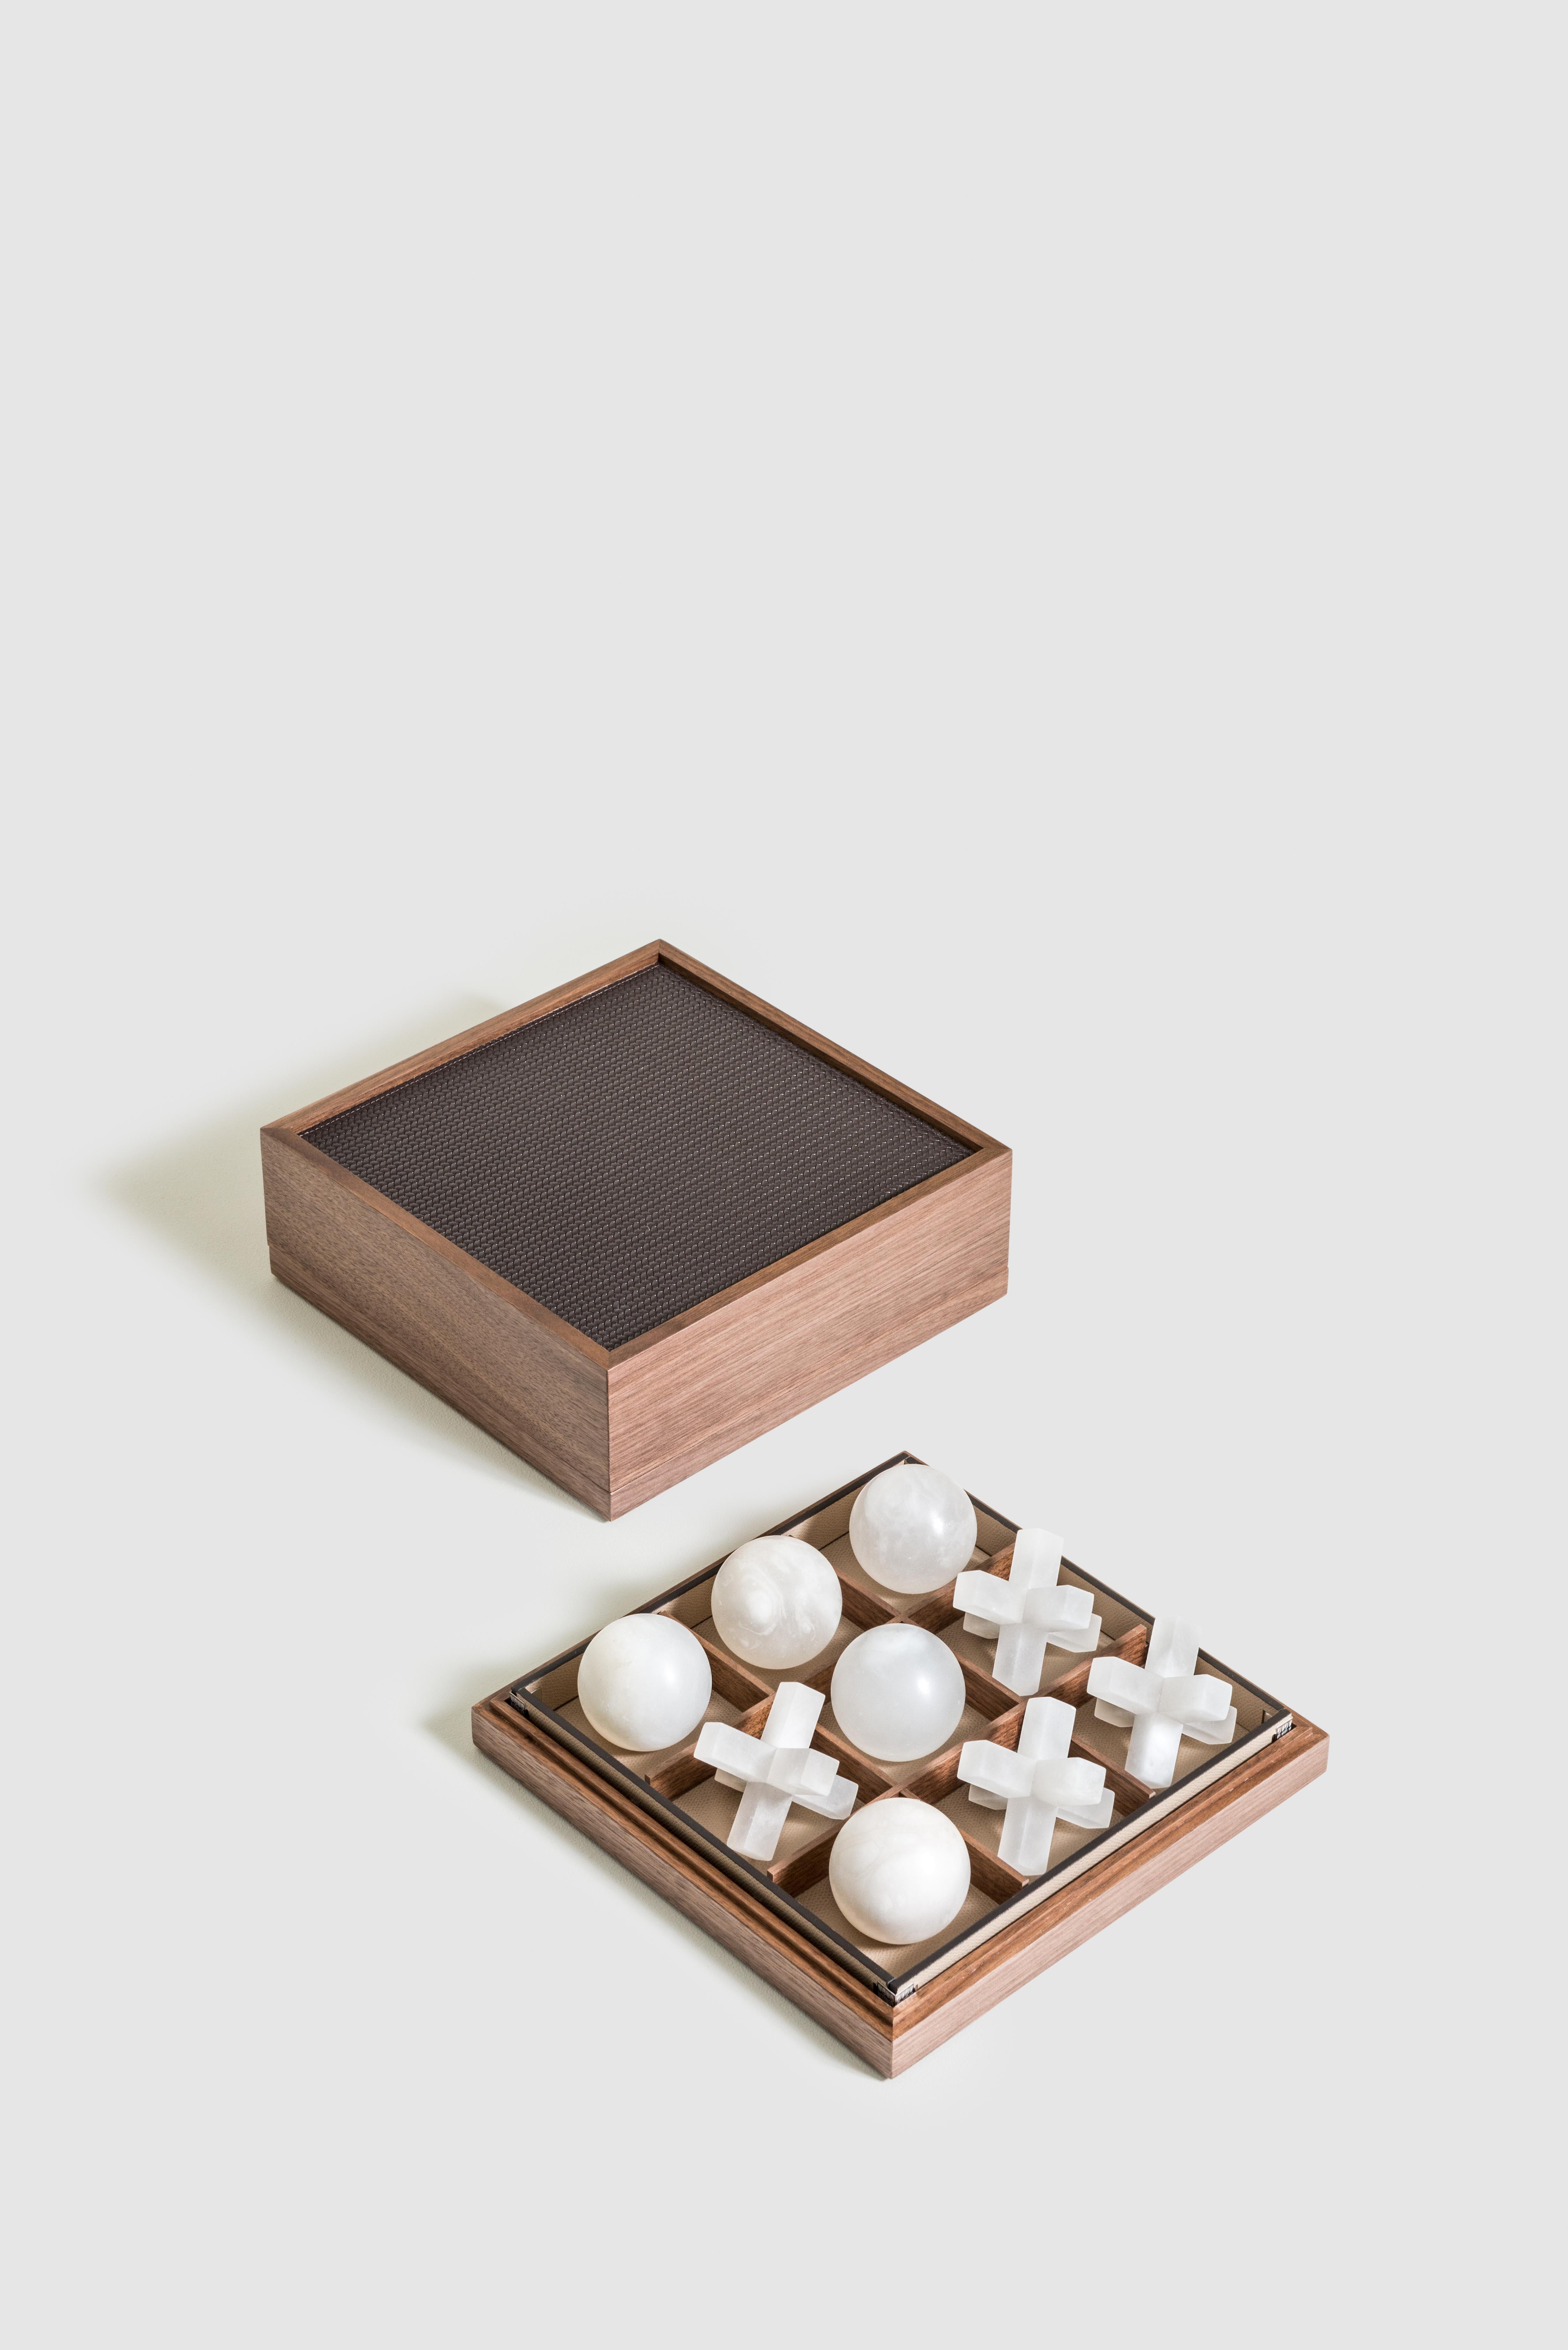 This nought and crosses set is anything but basic alabaster playing pieces add an entirely new dimension to the classic game.

This luxury set includes nine sculptural playing pieces crafted from Tuscan Volterra alabaster. Ideal for travel or